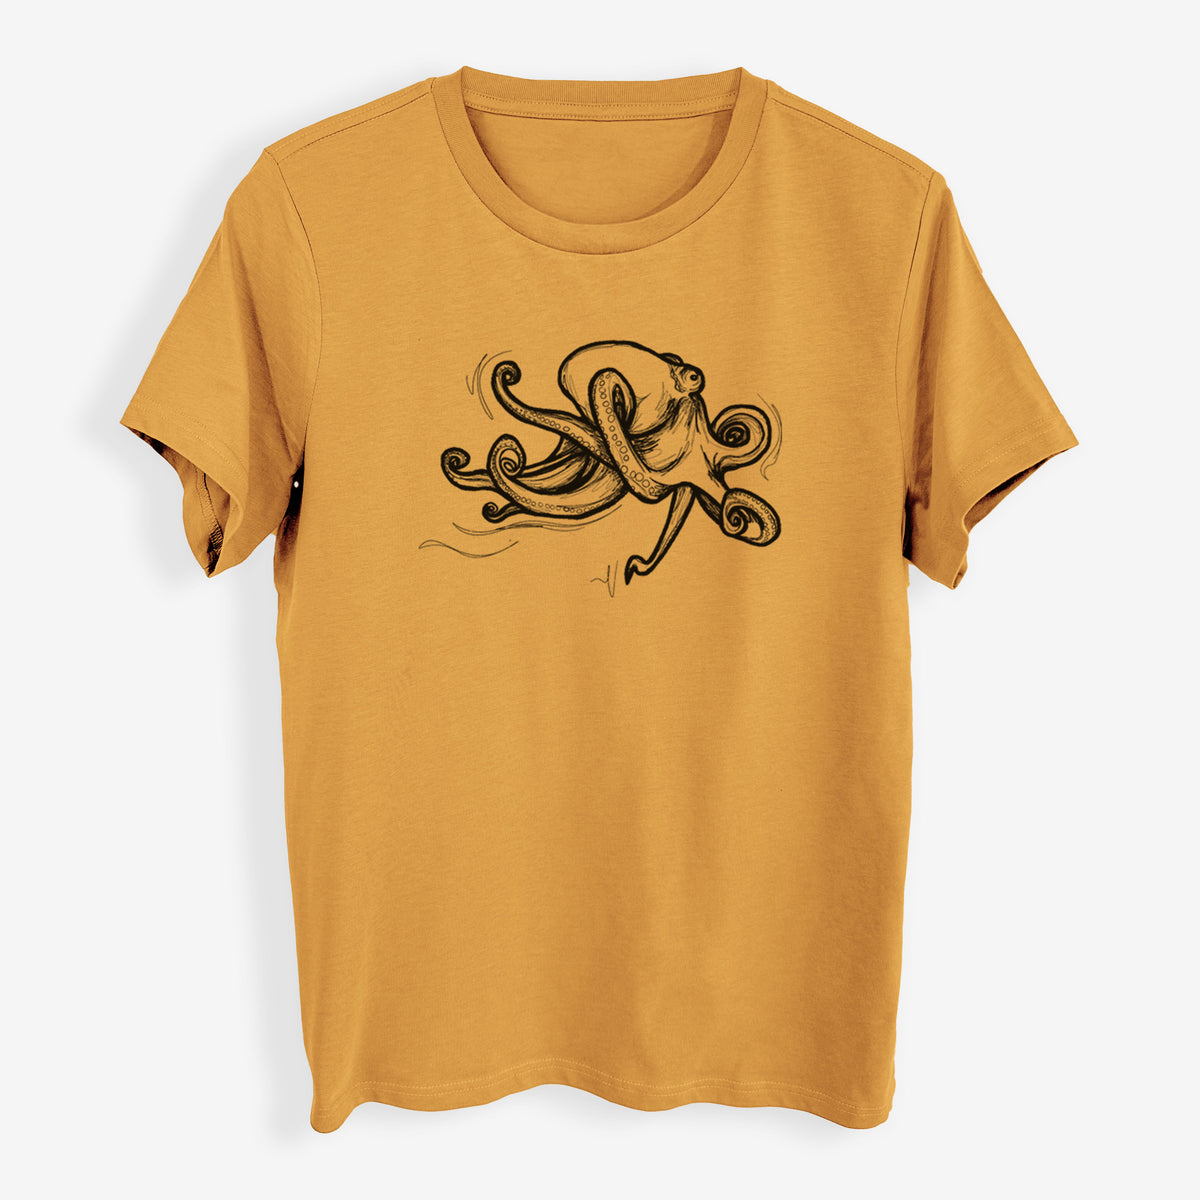 Giant Pacific Octopus - Womens Everyday Maple Tee